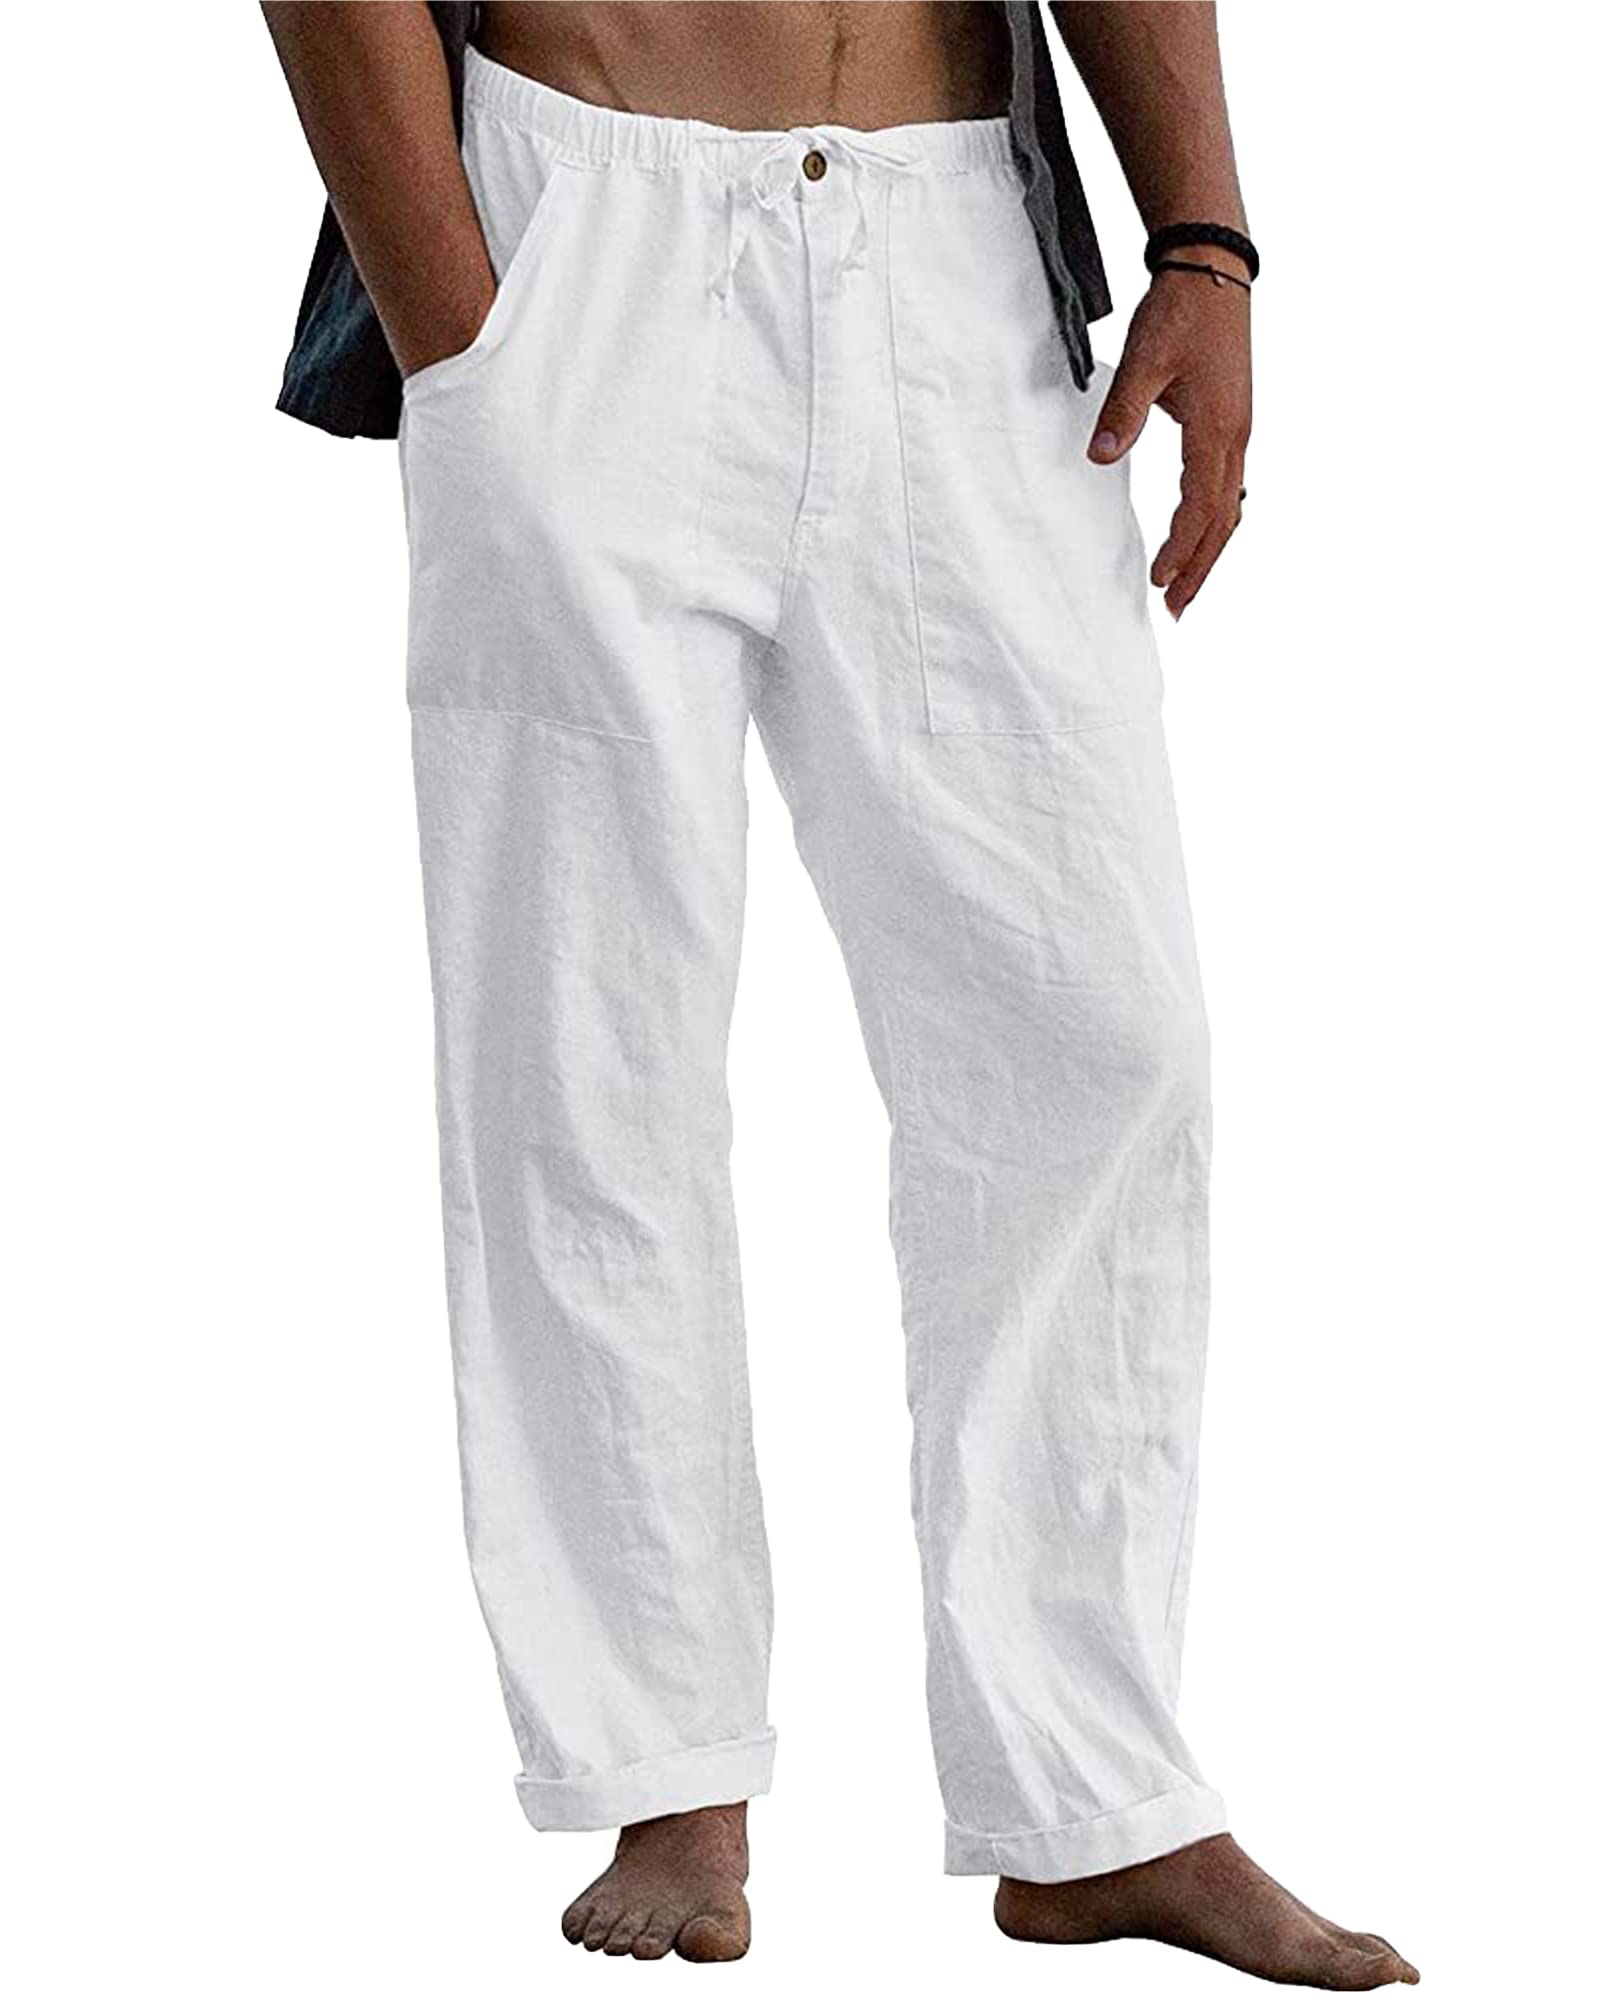 Off White Solid Cotton Polyester Men Slim Fit Casual Trousers - Selling  Fast at Pantaloons.com